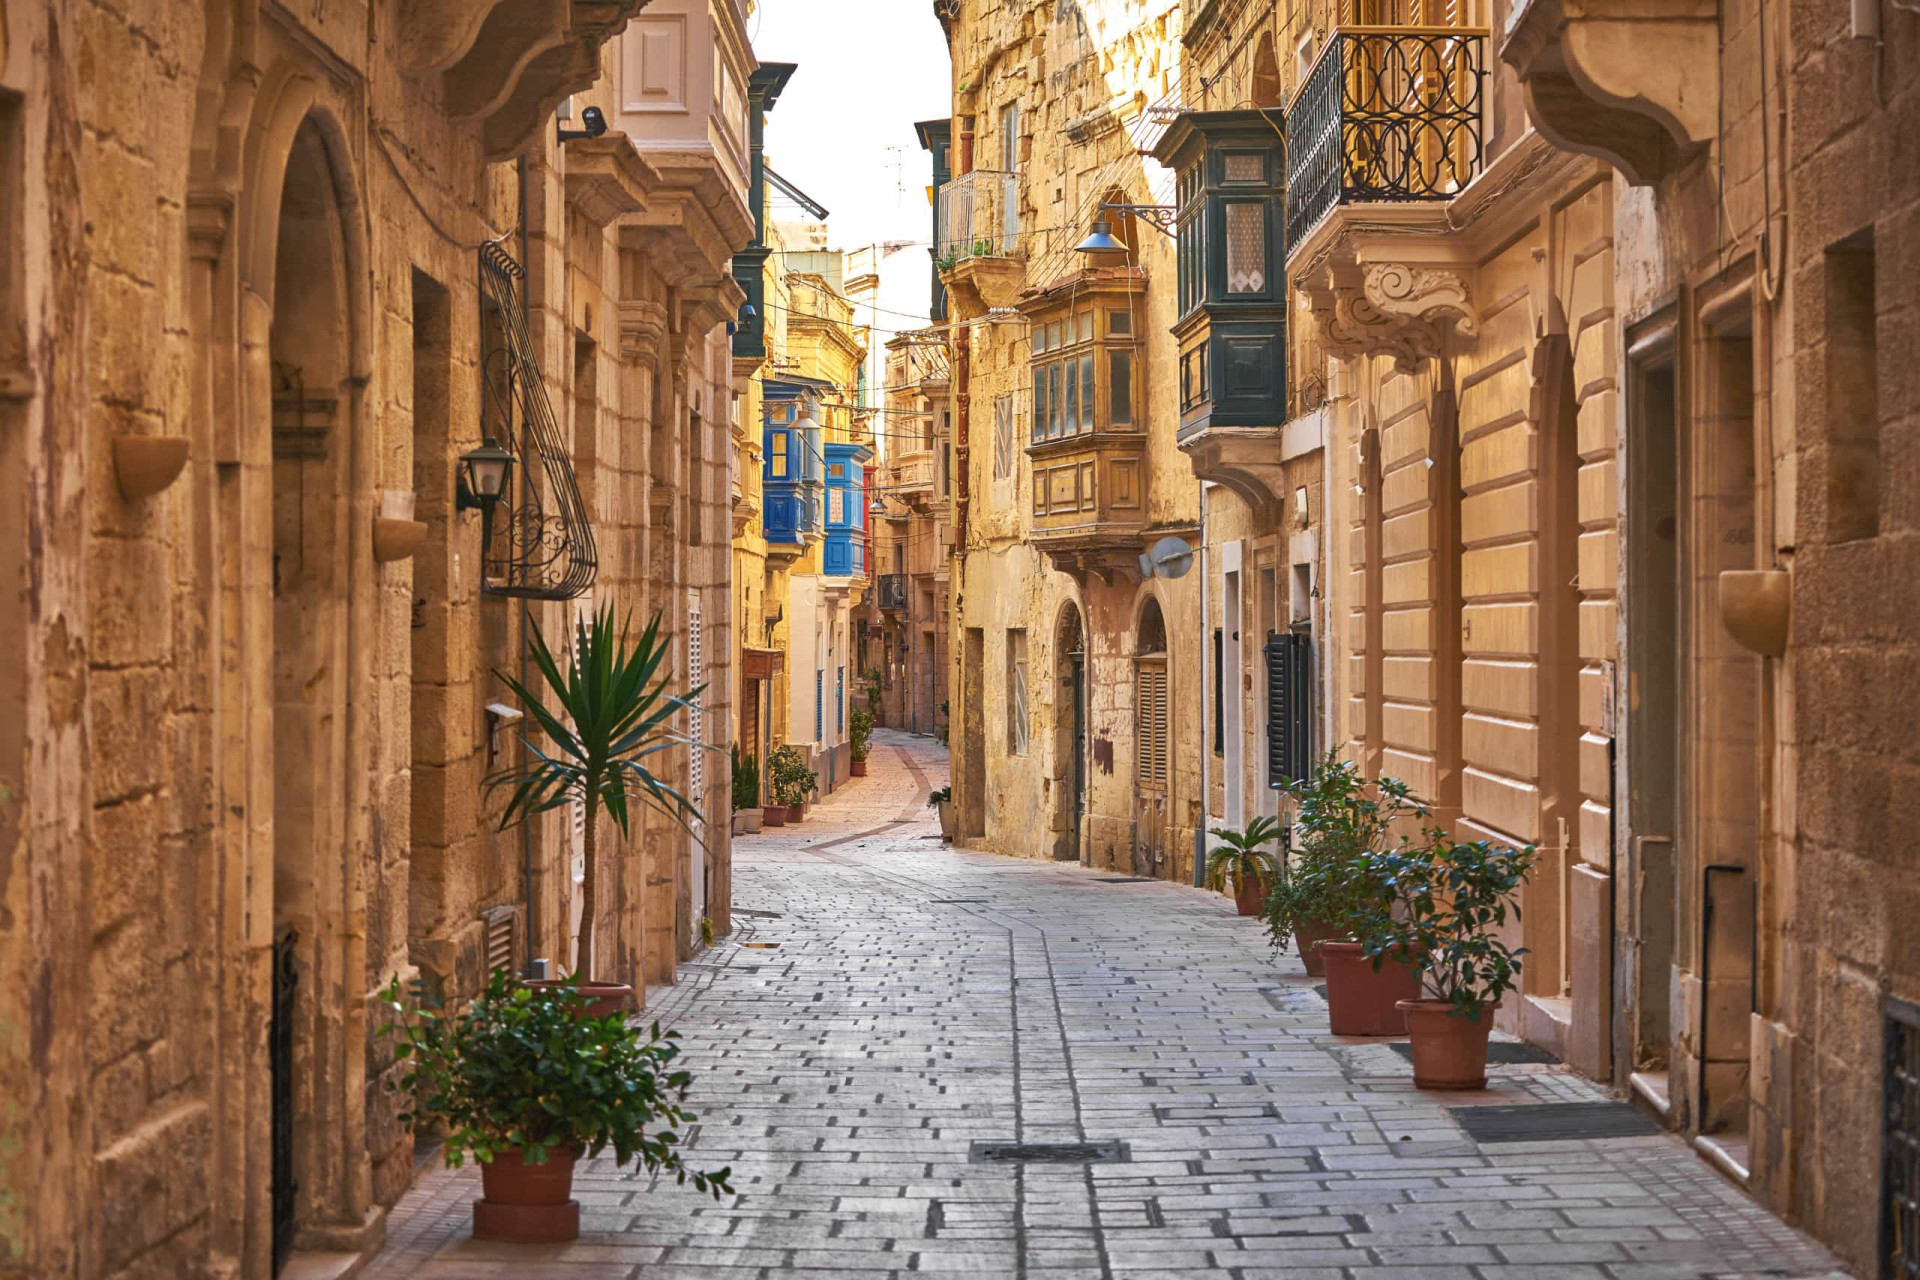 Malta offers the typical Western European lifestyle with hints of influence from neighboring North Africa. The island was under British rule for 150 years so English is still one of the national languages.<p>You may also like:<a href="https://www.starsinsider.com/n/339909?utm_source=msn.com&utm_medium=display&utm_campaign=referral_description&utm_content=423169en-us"> Too cool for school: celebs who never smile on the red carpet</a></p>